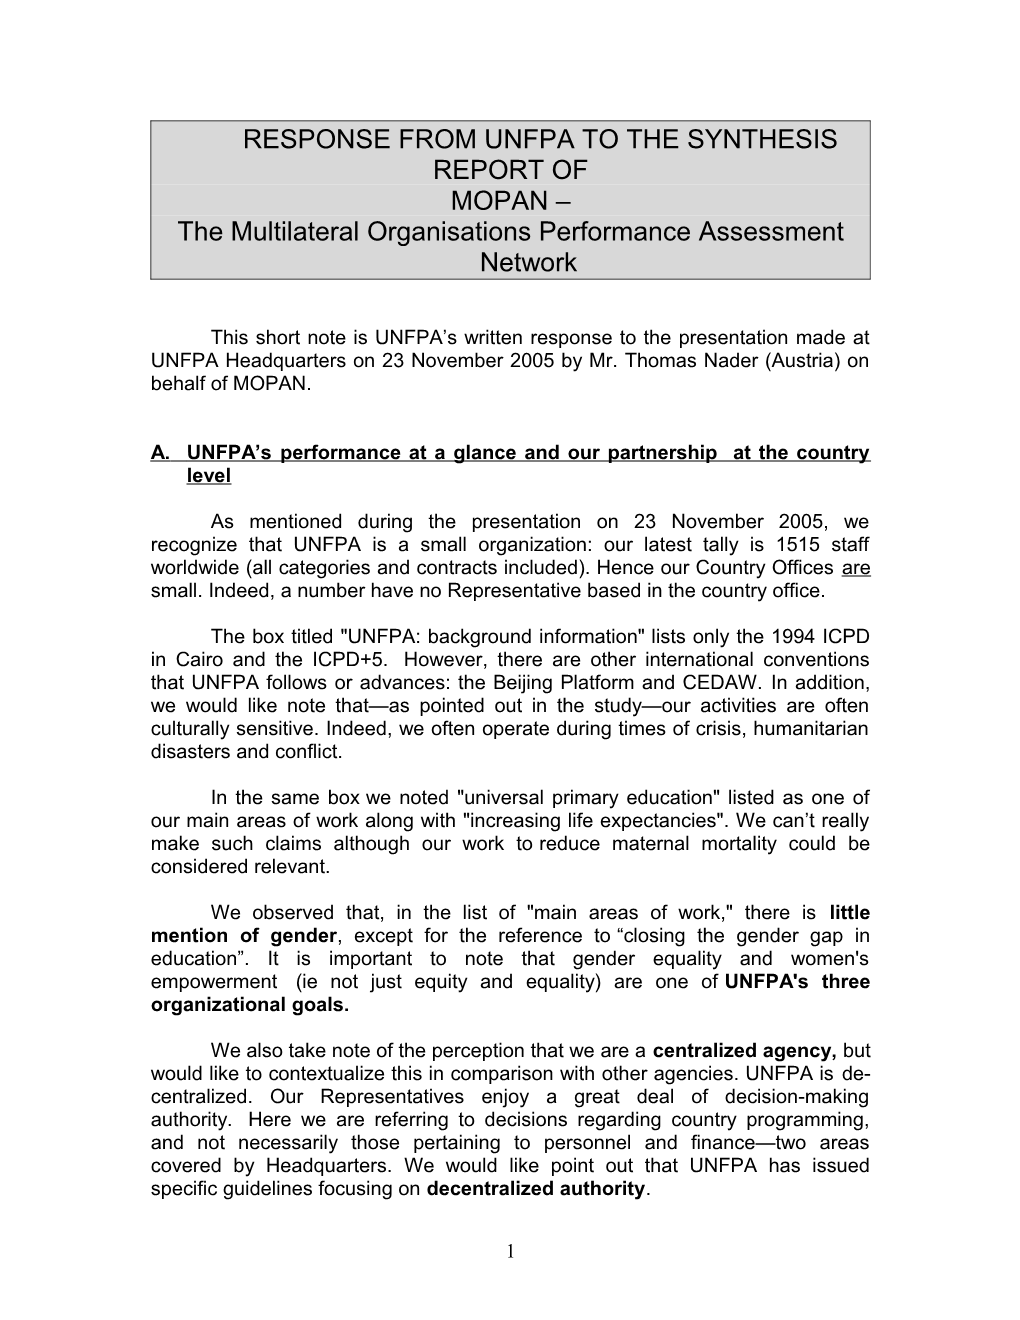 Draft Response from Unfpa to the Synthesis Report of Mopan